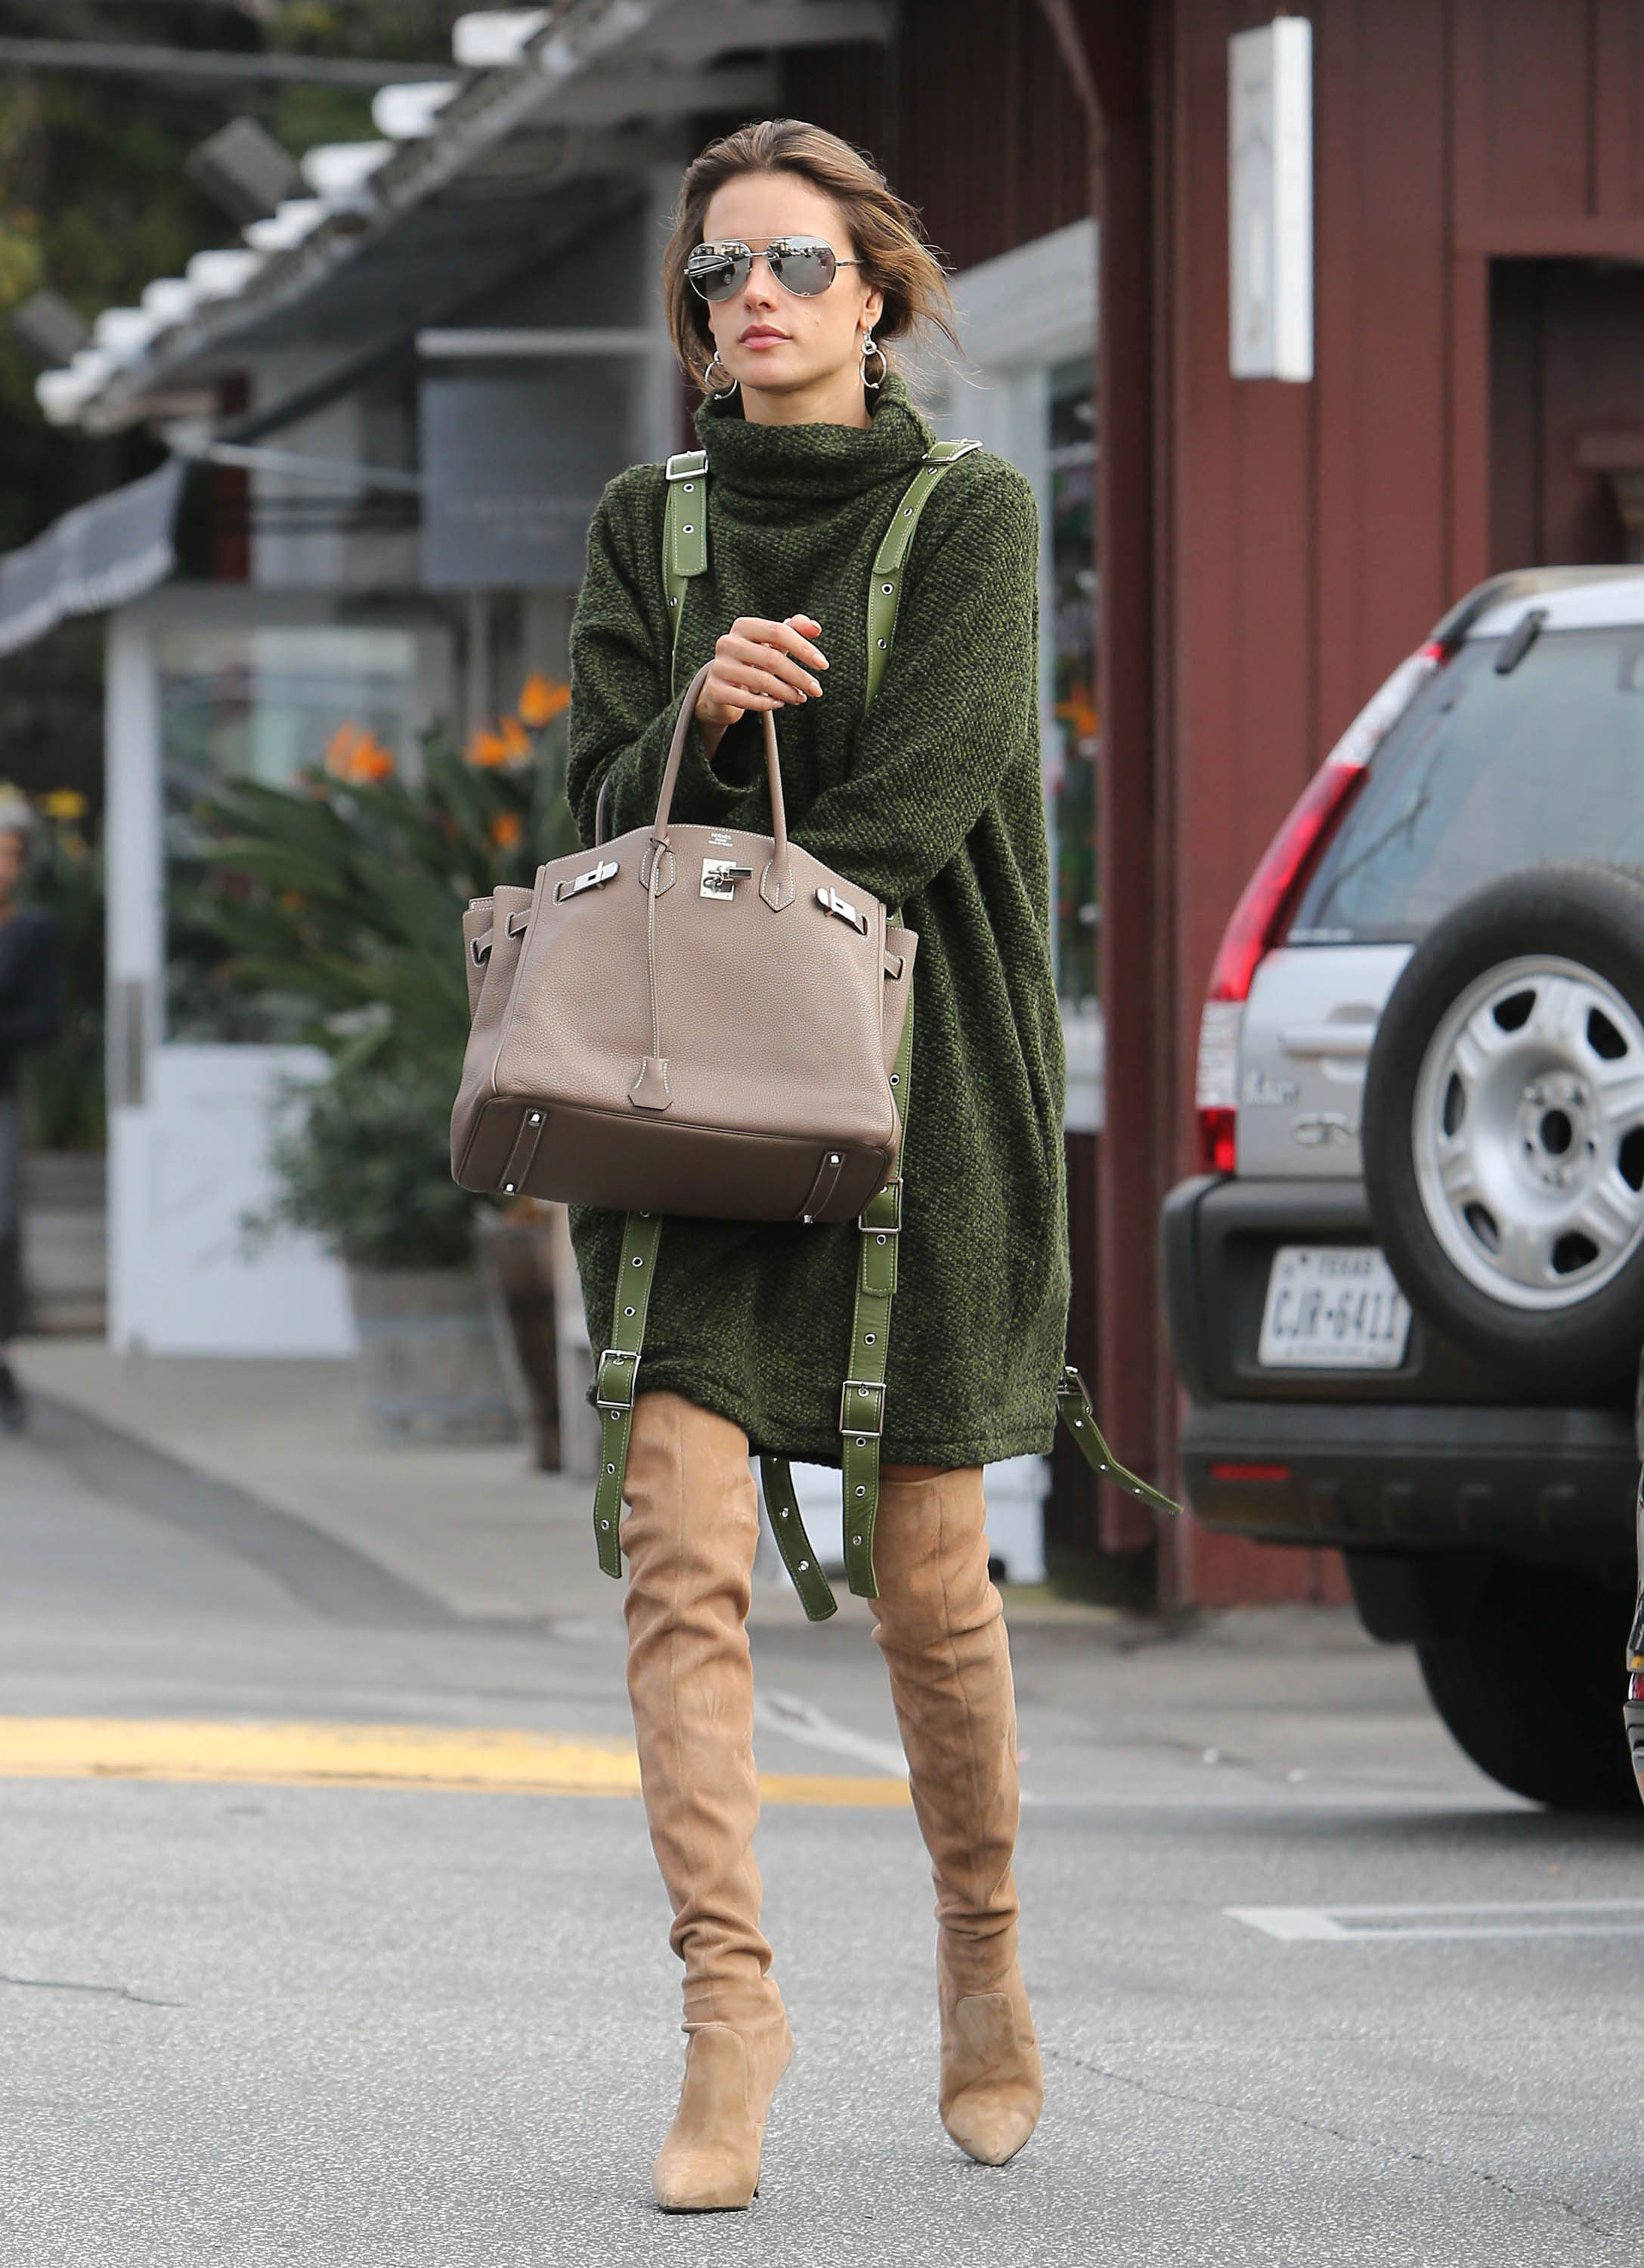 Shop Alessandra Ambrosio's turtleneck sweaterdress and over-the-knee boots look for less.